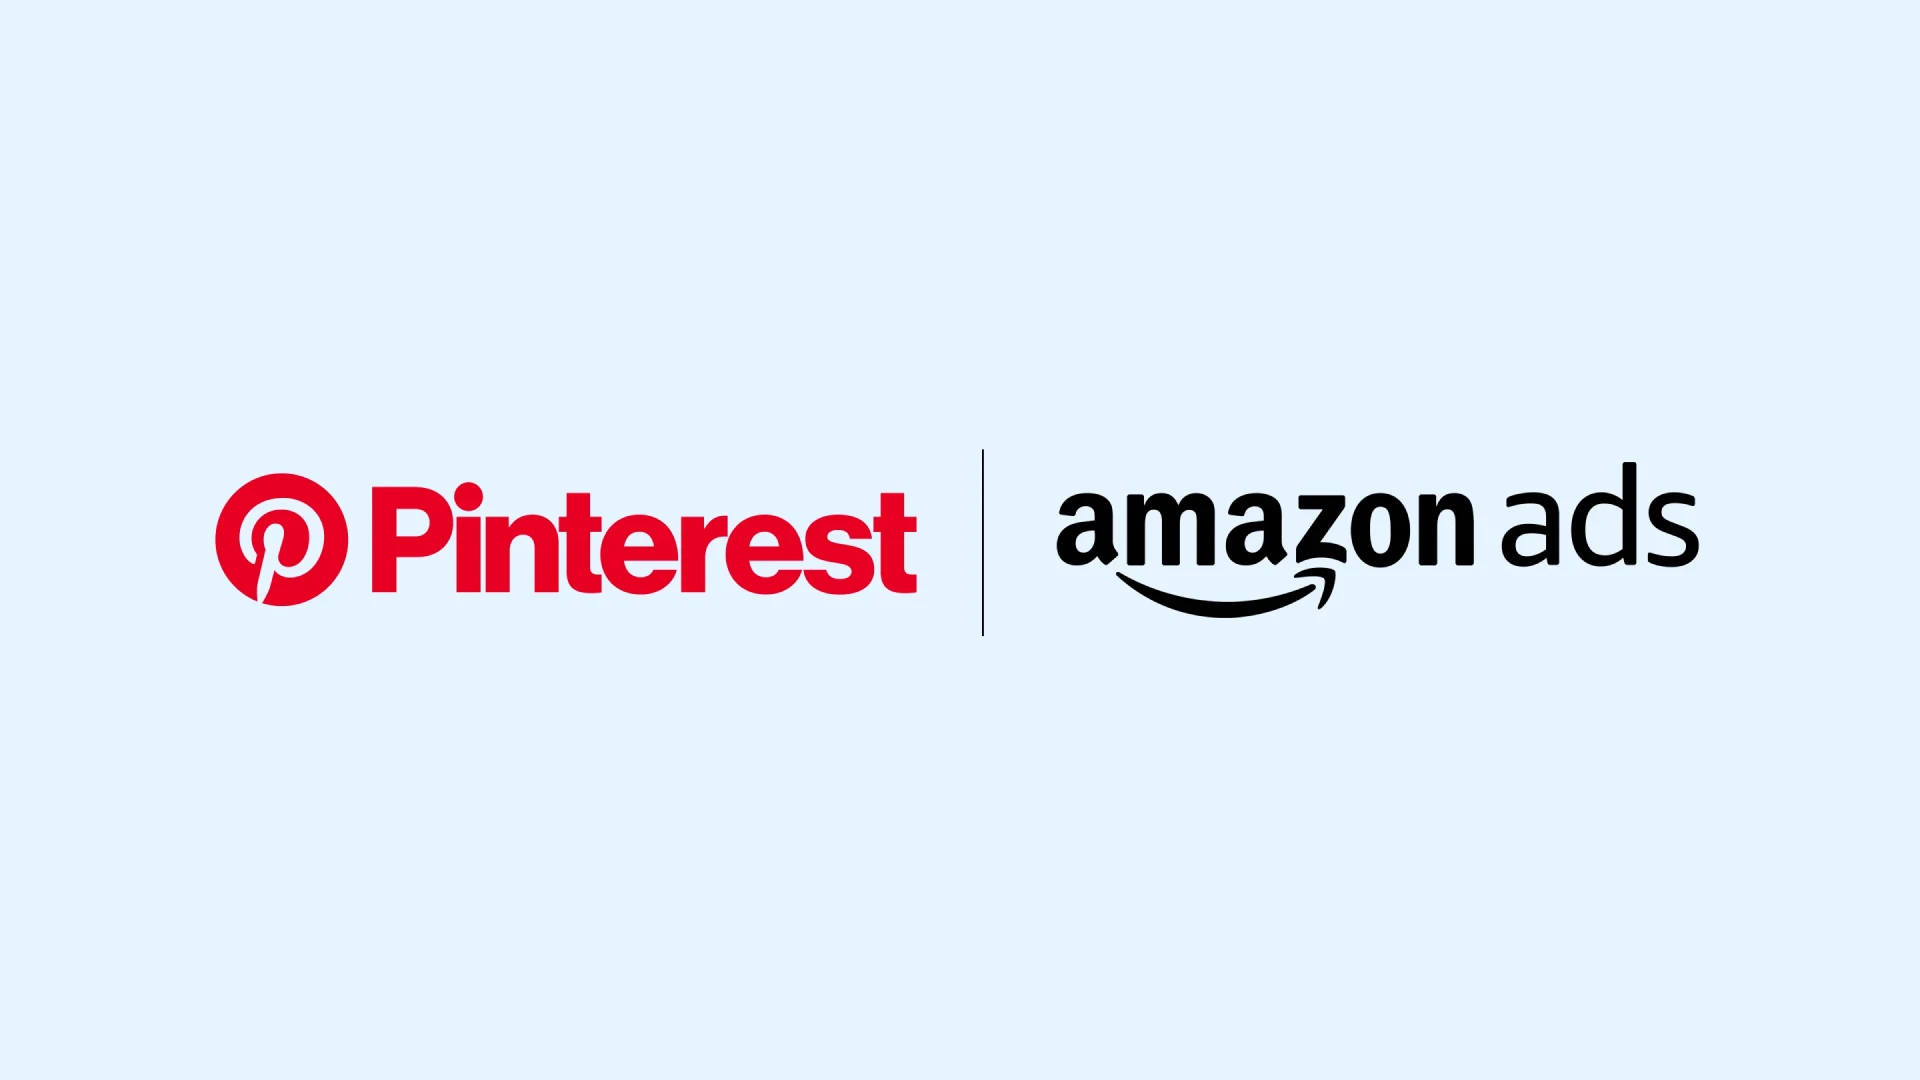  Pinterest's logo and Amazon Ads' logo are displayed together over a blue background, signifying the brand partnership